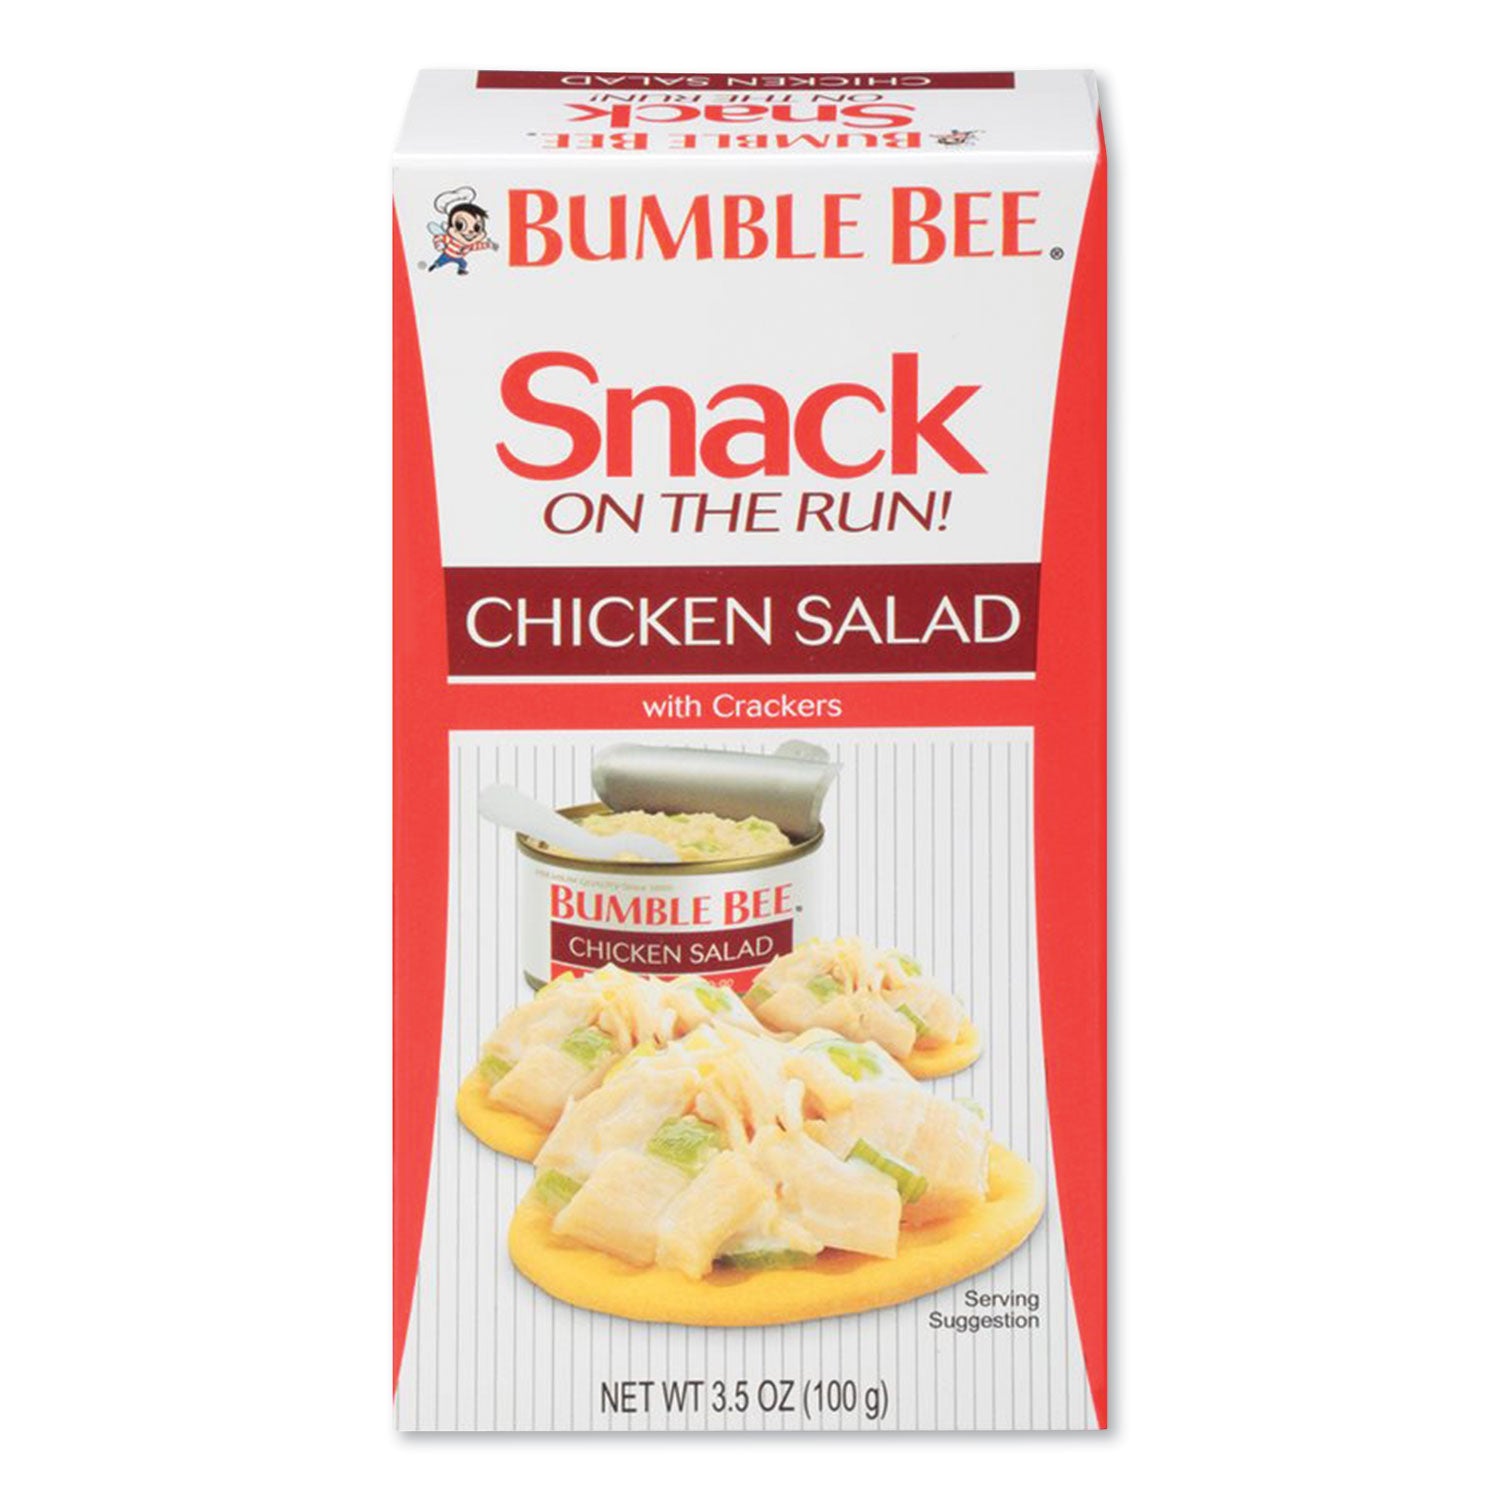 snack-on-the-run-chicken-salad-with-crackers-35-oz-pack-12-carton_bbyahf70350 - 1